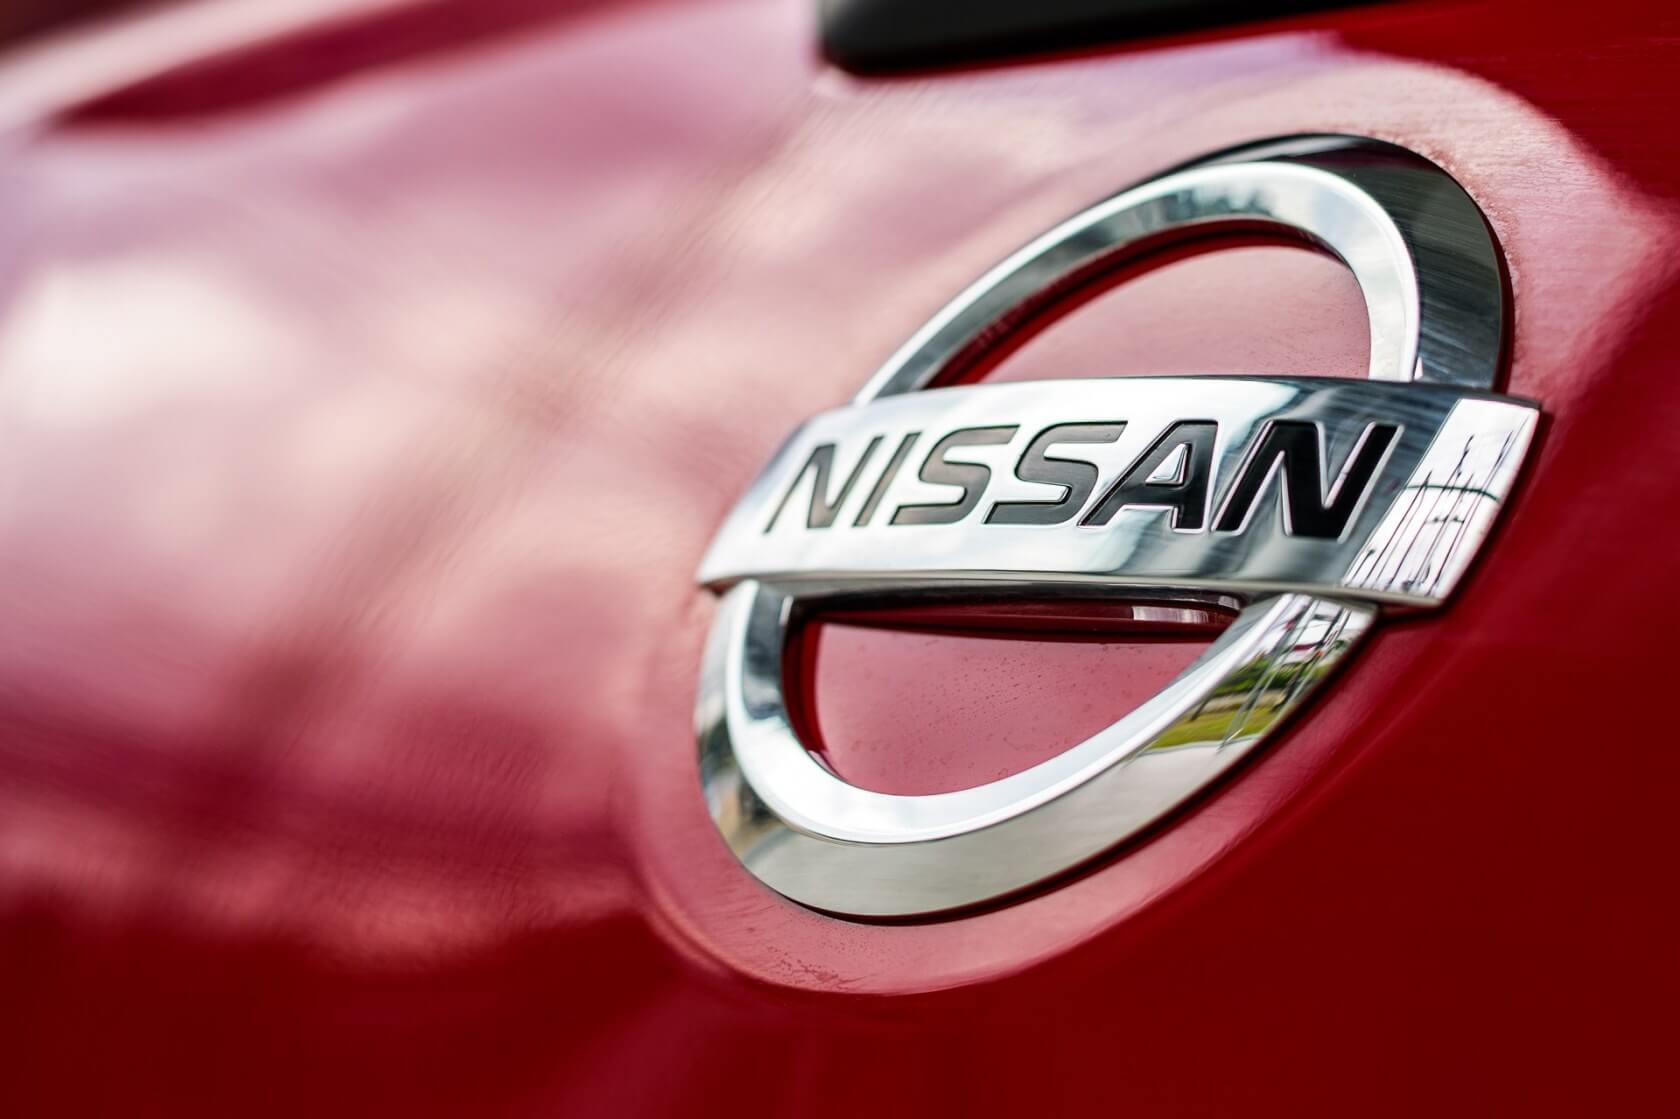 Nissan will lay off 12,500 employees following 95 percent drop in Q1 net income